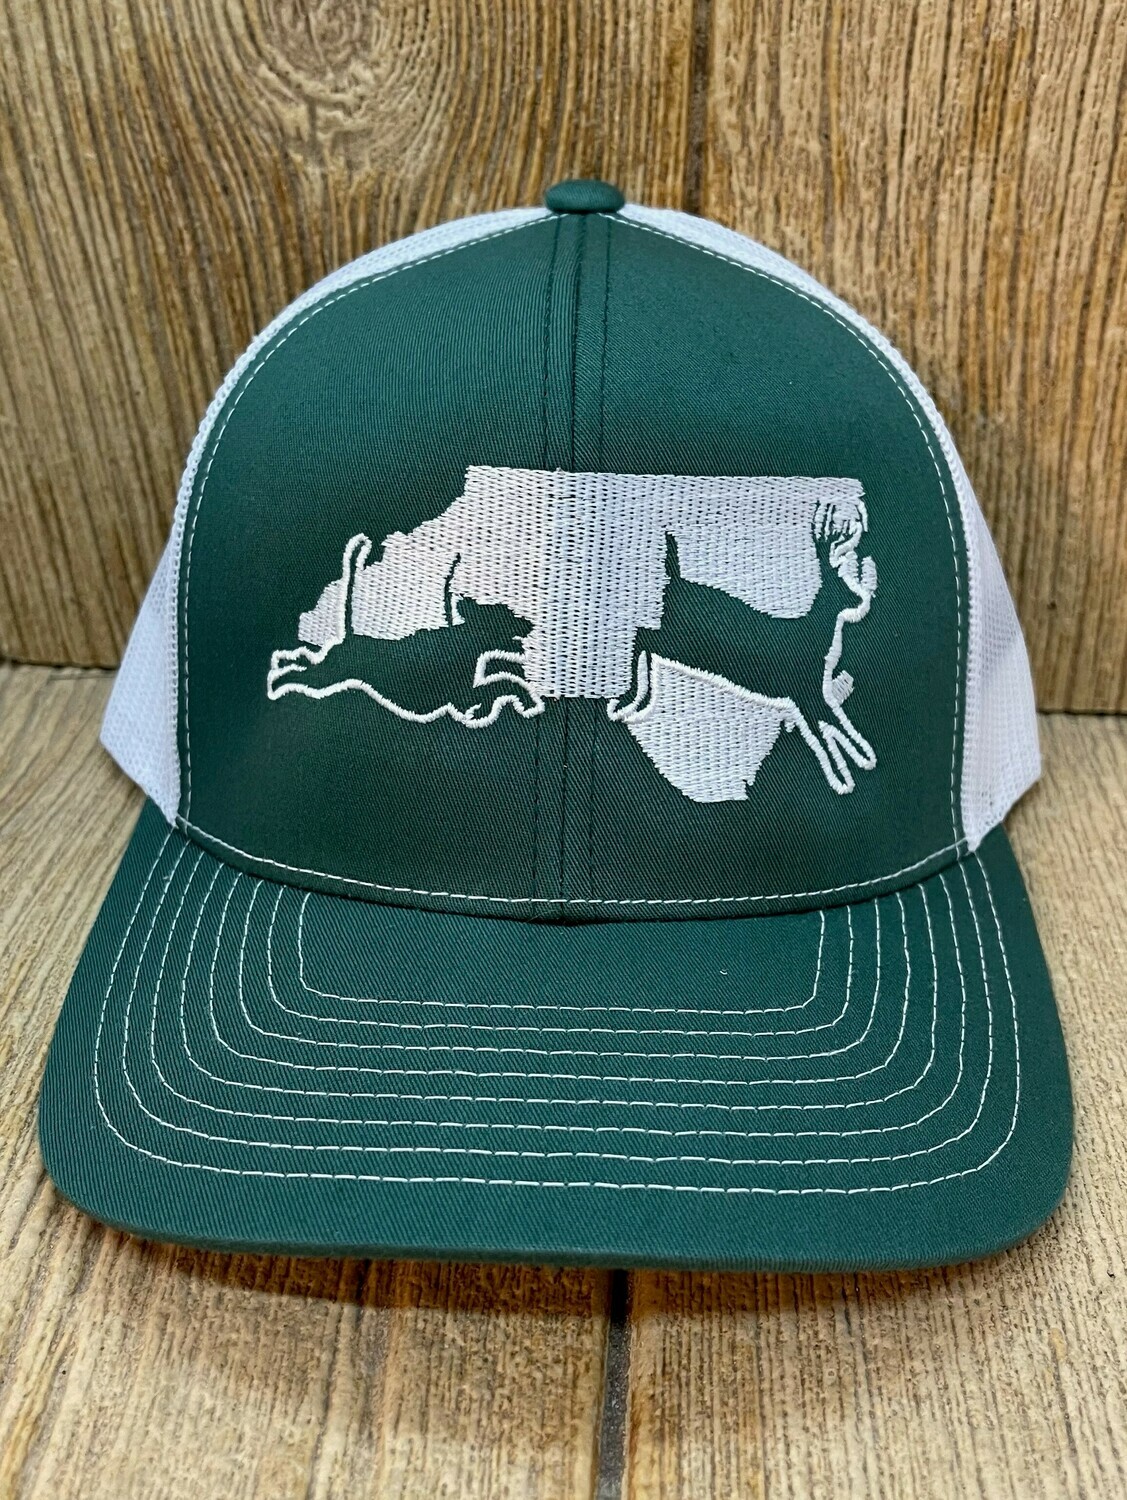 Dog Running Deer State Adjustable Hat - All 50 States & 44 Hat Colors Available!!!